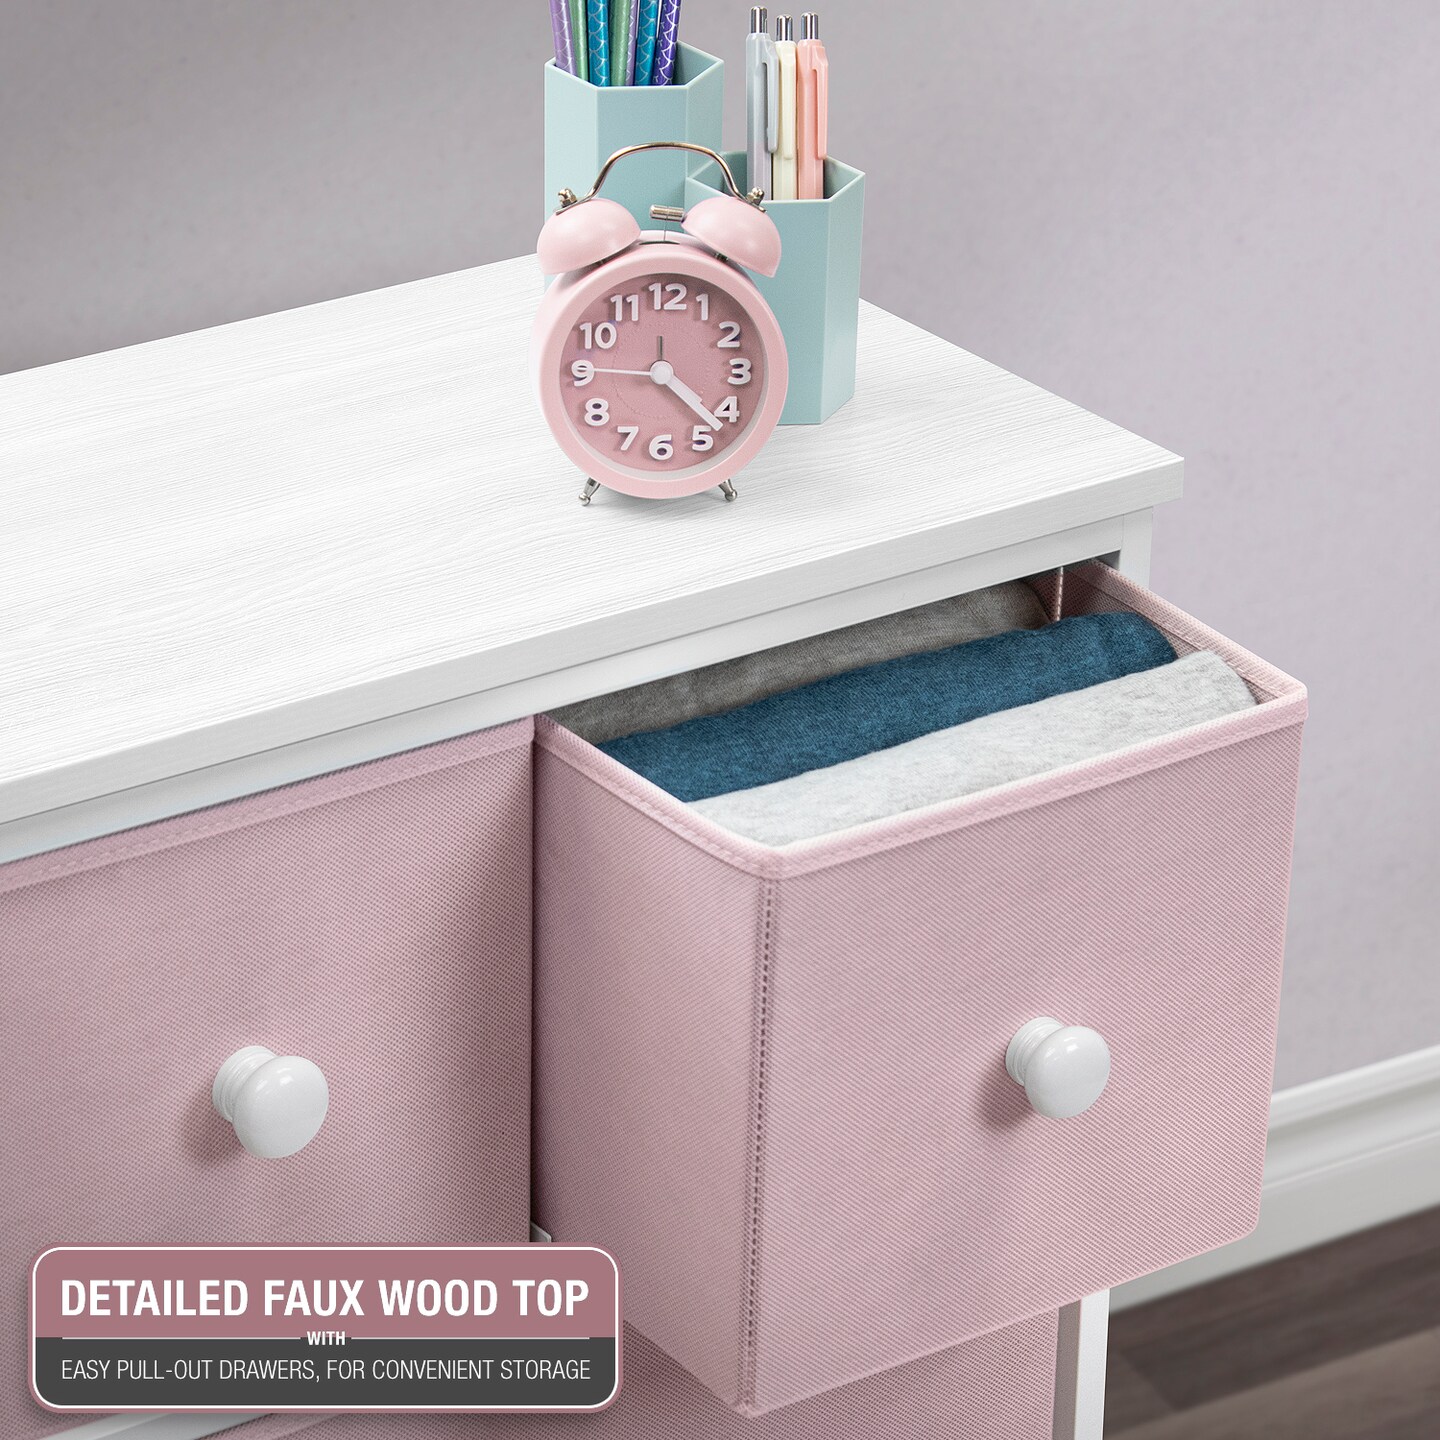 Sorbus 8 Drawers Chest Dresser with Knob Handle - Great for Household Storage and Organization